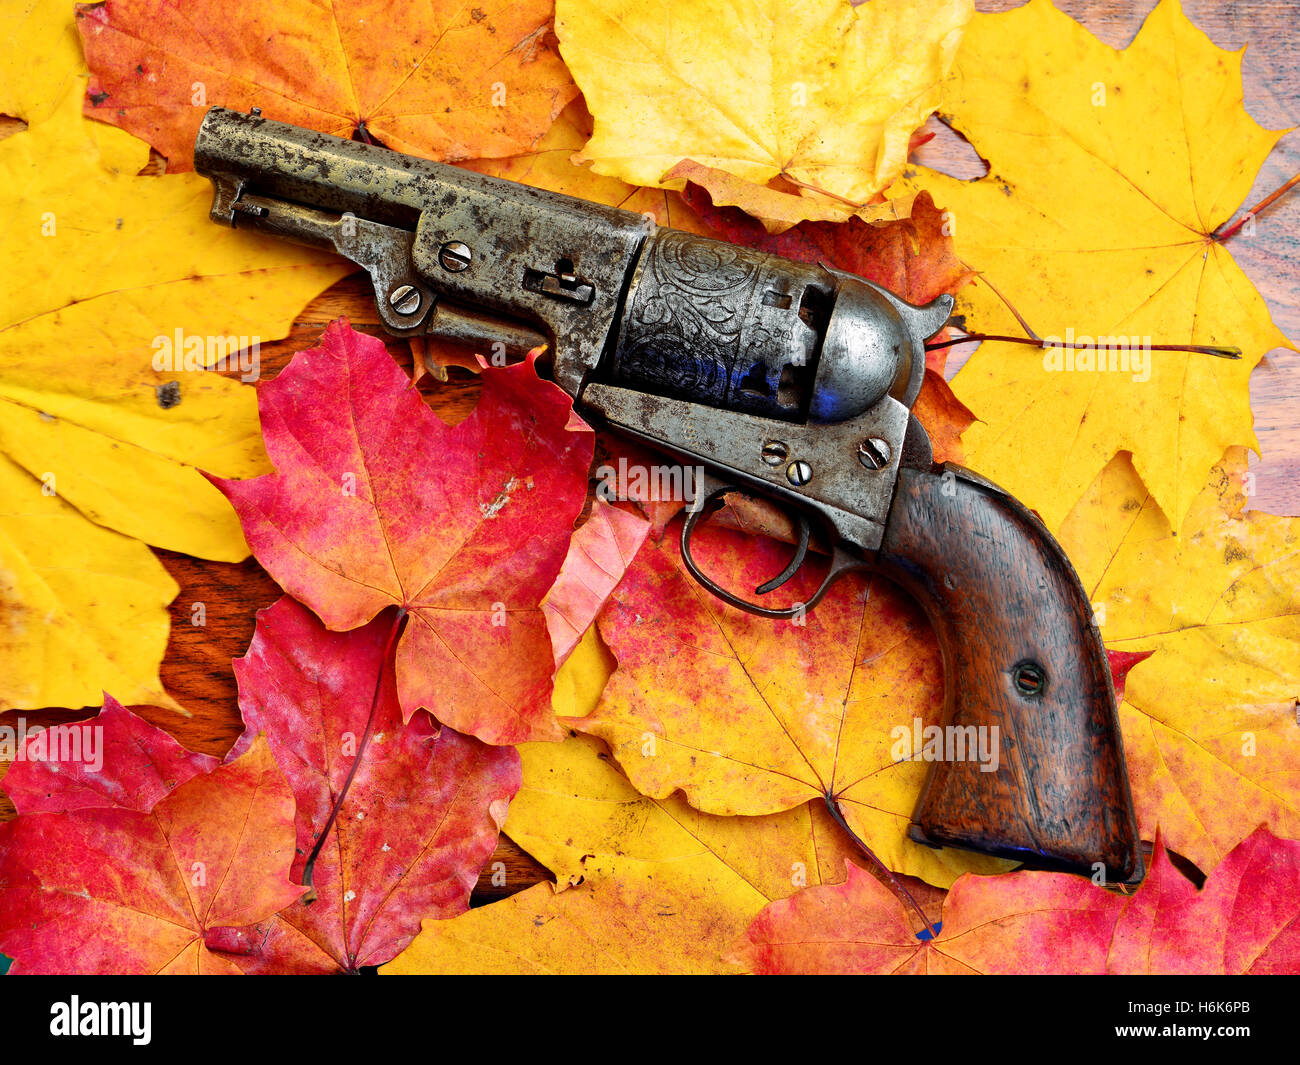 Cap and ball percussion antique pistol Stock Photo